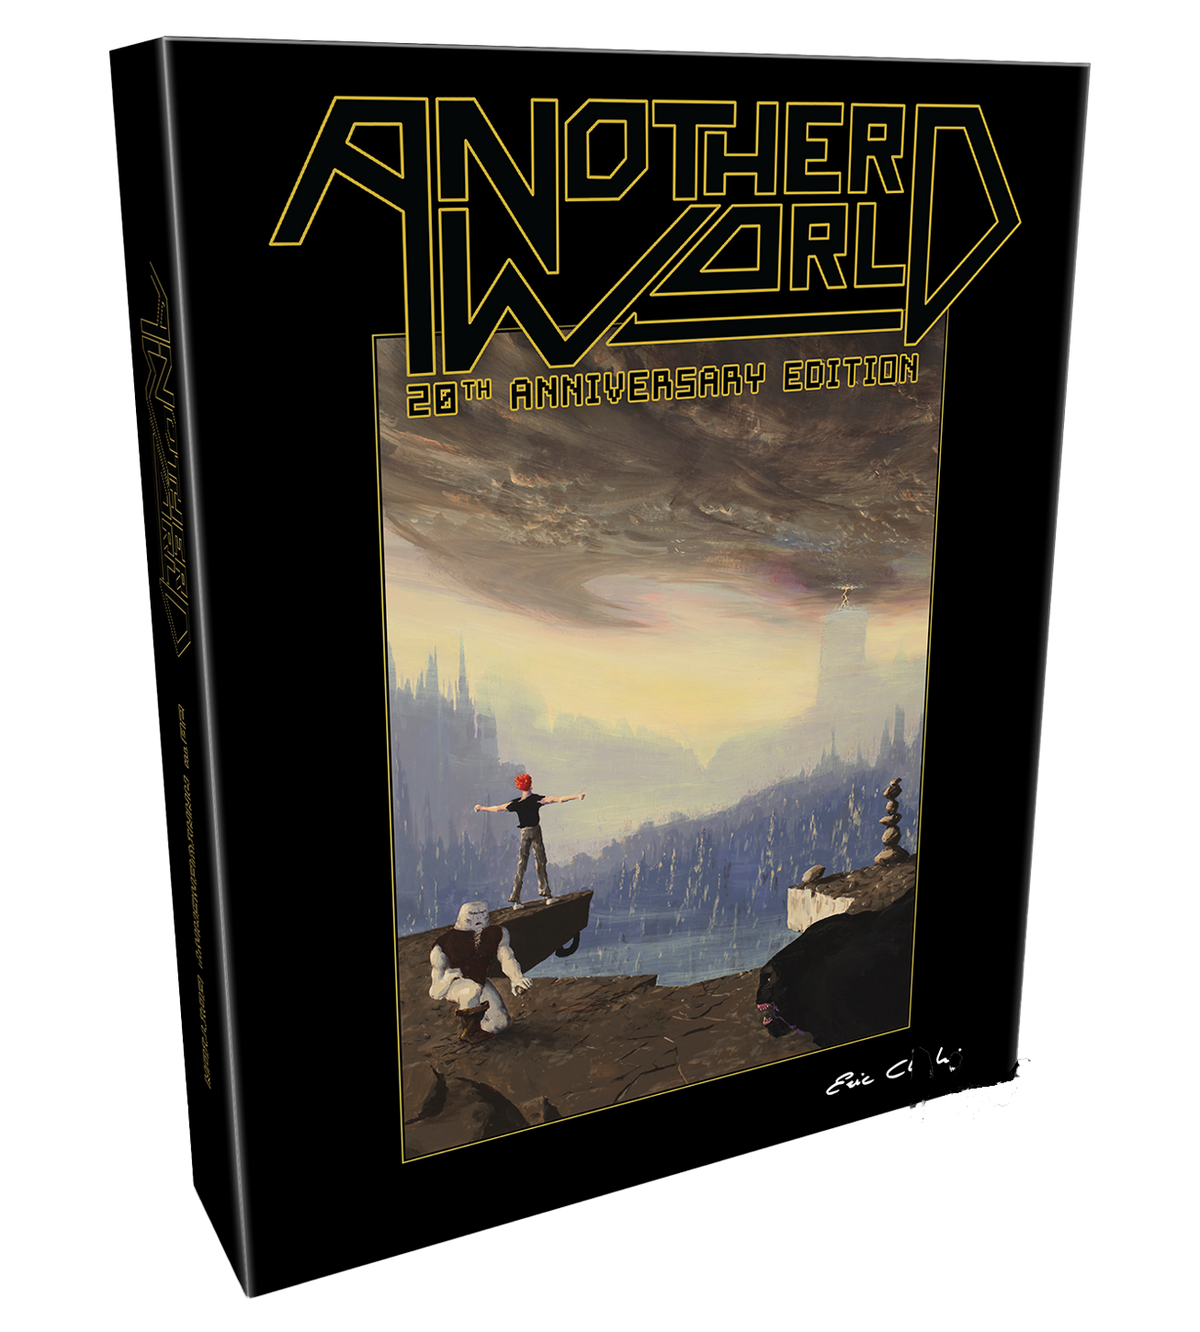 Limited Run #180: Another World Classic Edition (PS4)